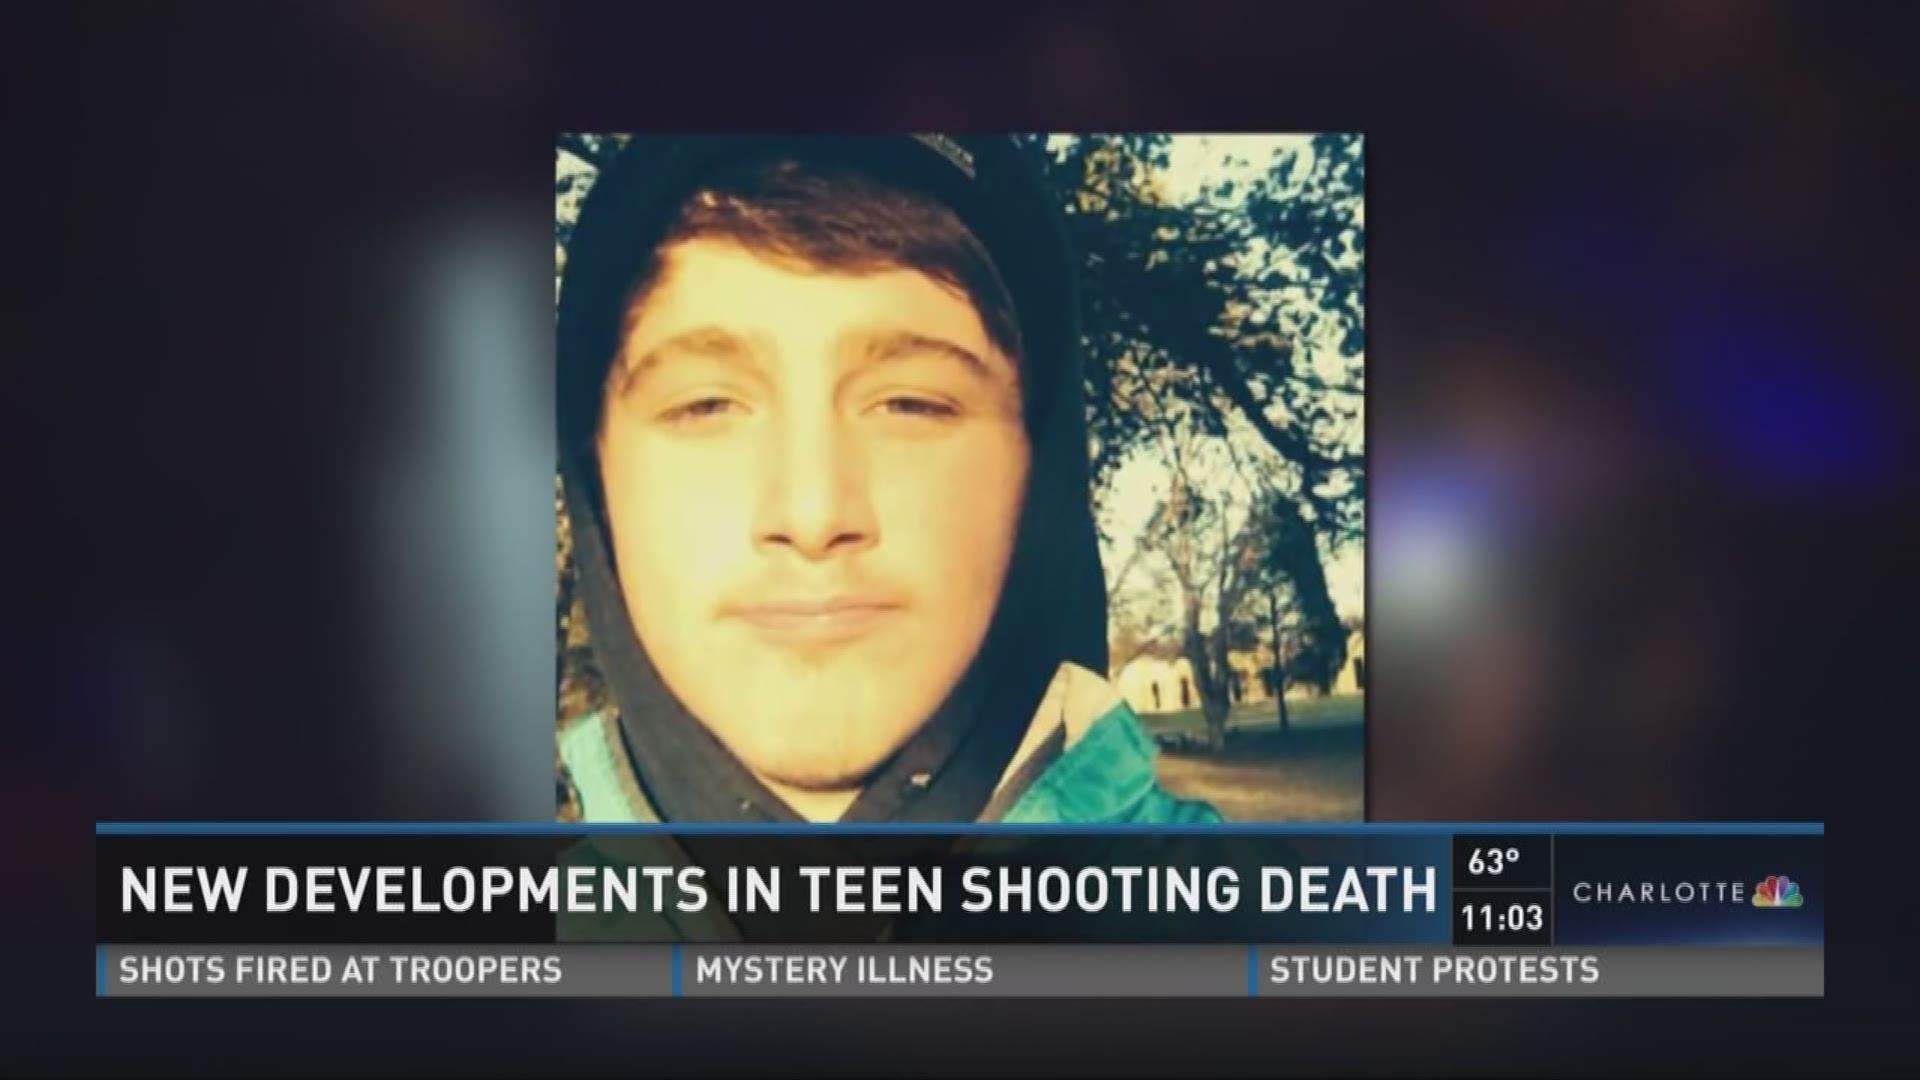 NBC Charlotte is following several new developments in the shooting death of a local teenager.